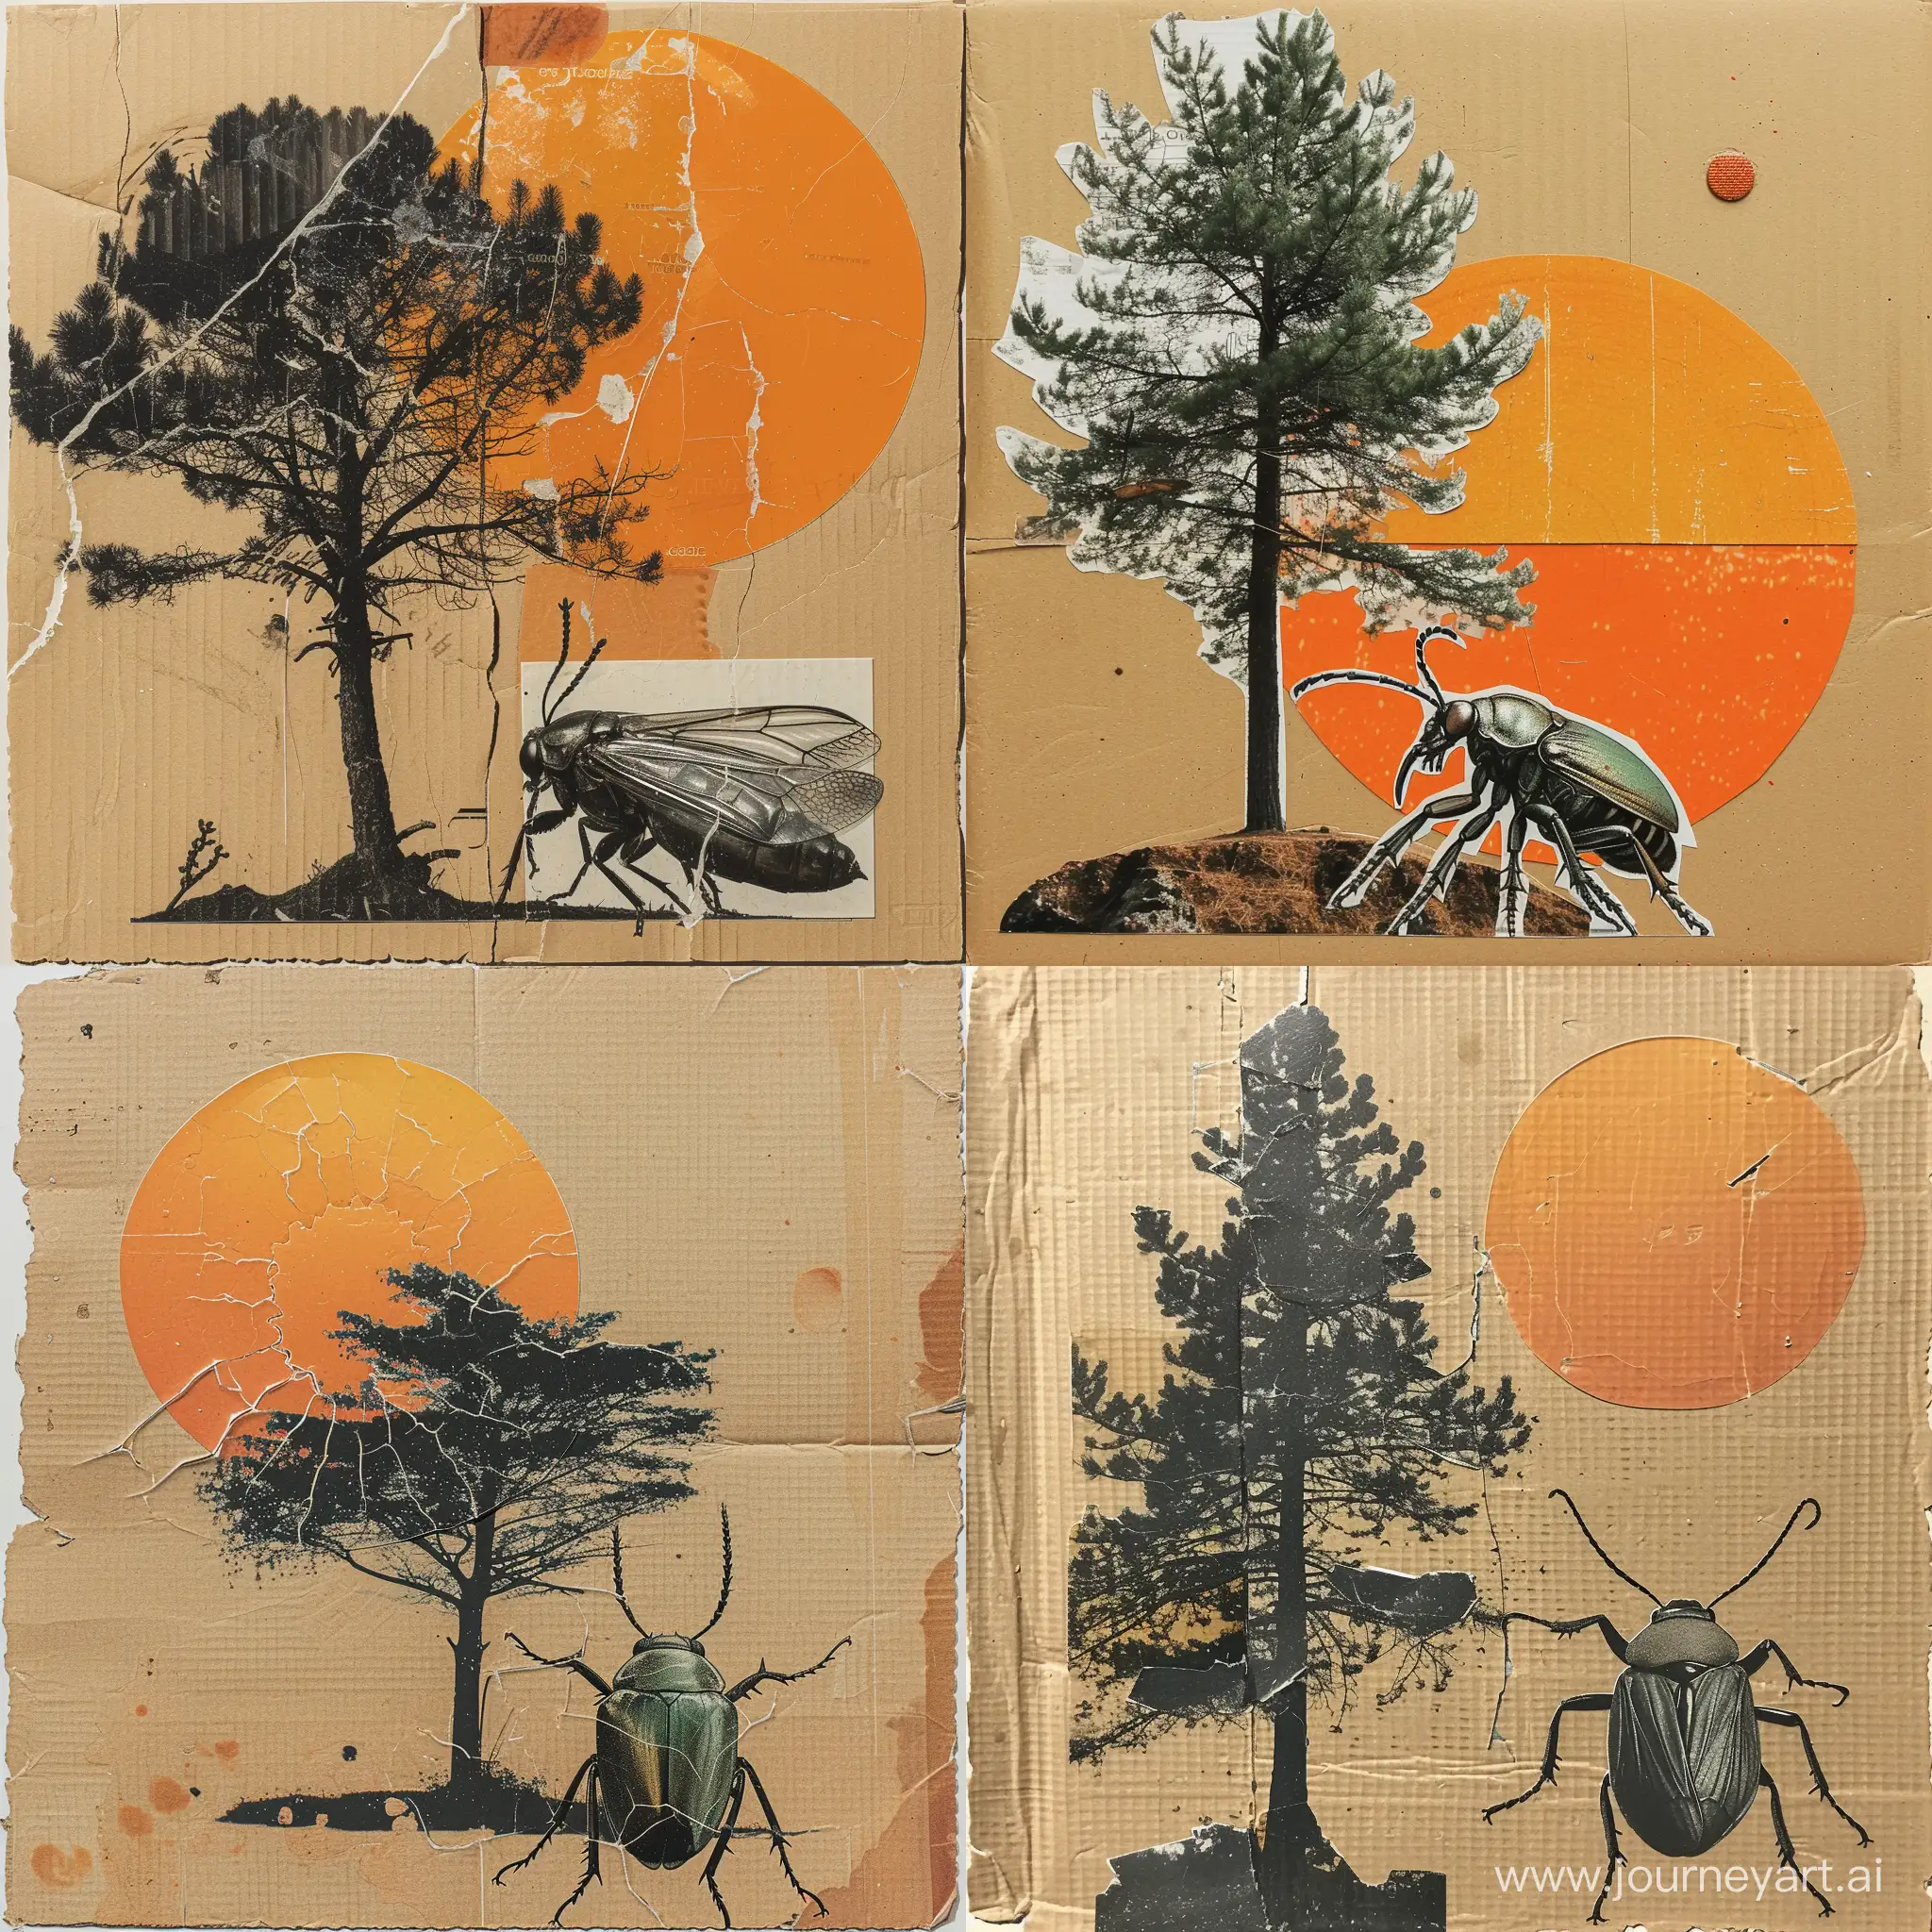 Minimalist-Analog-Collage-Tree-Sun-and-Giant-Insect-on-Cardboard-Page